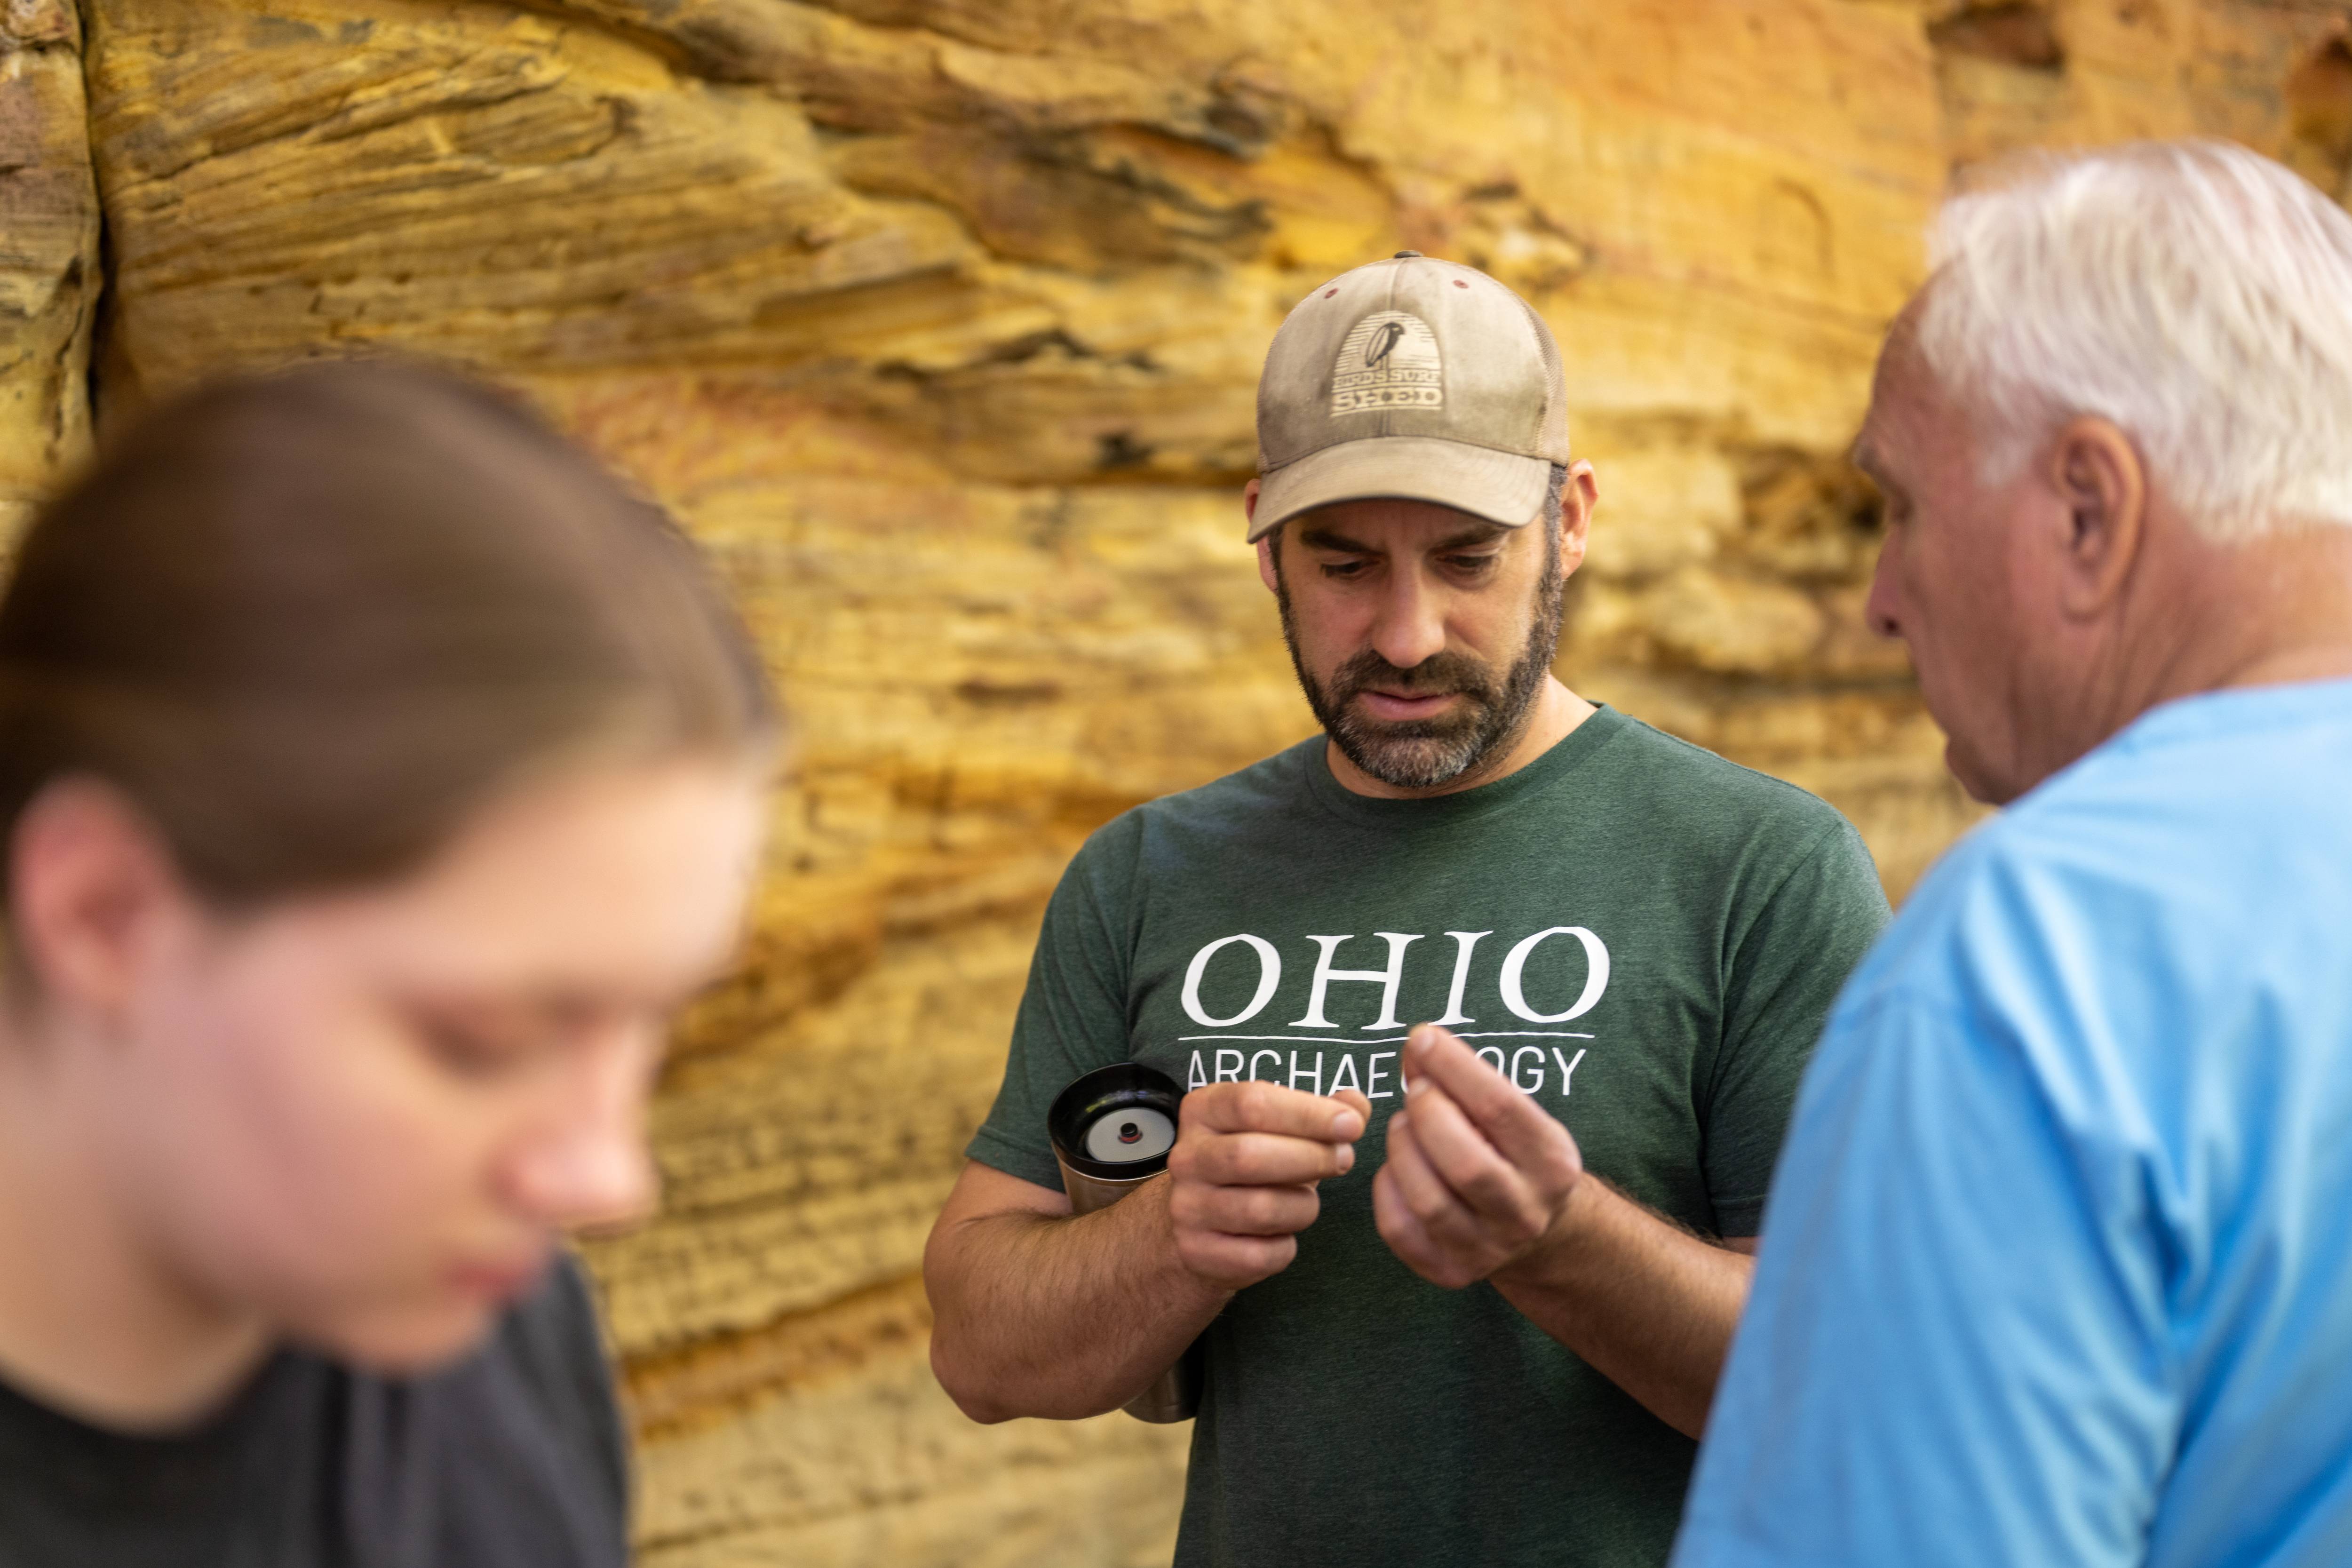 Dr. Joseph Gingerich has been leading anthropology students on digs in southeast Ohio and even to Virginia, discovering new insights into the first peoples who moved onto this continent, likely coming from west to east. Photo by Ben Siegel